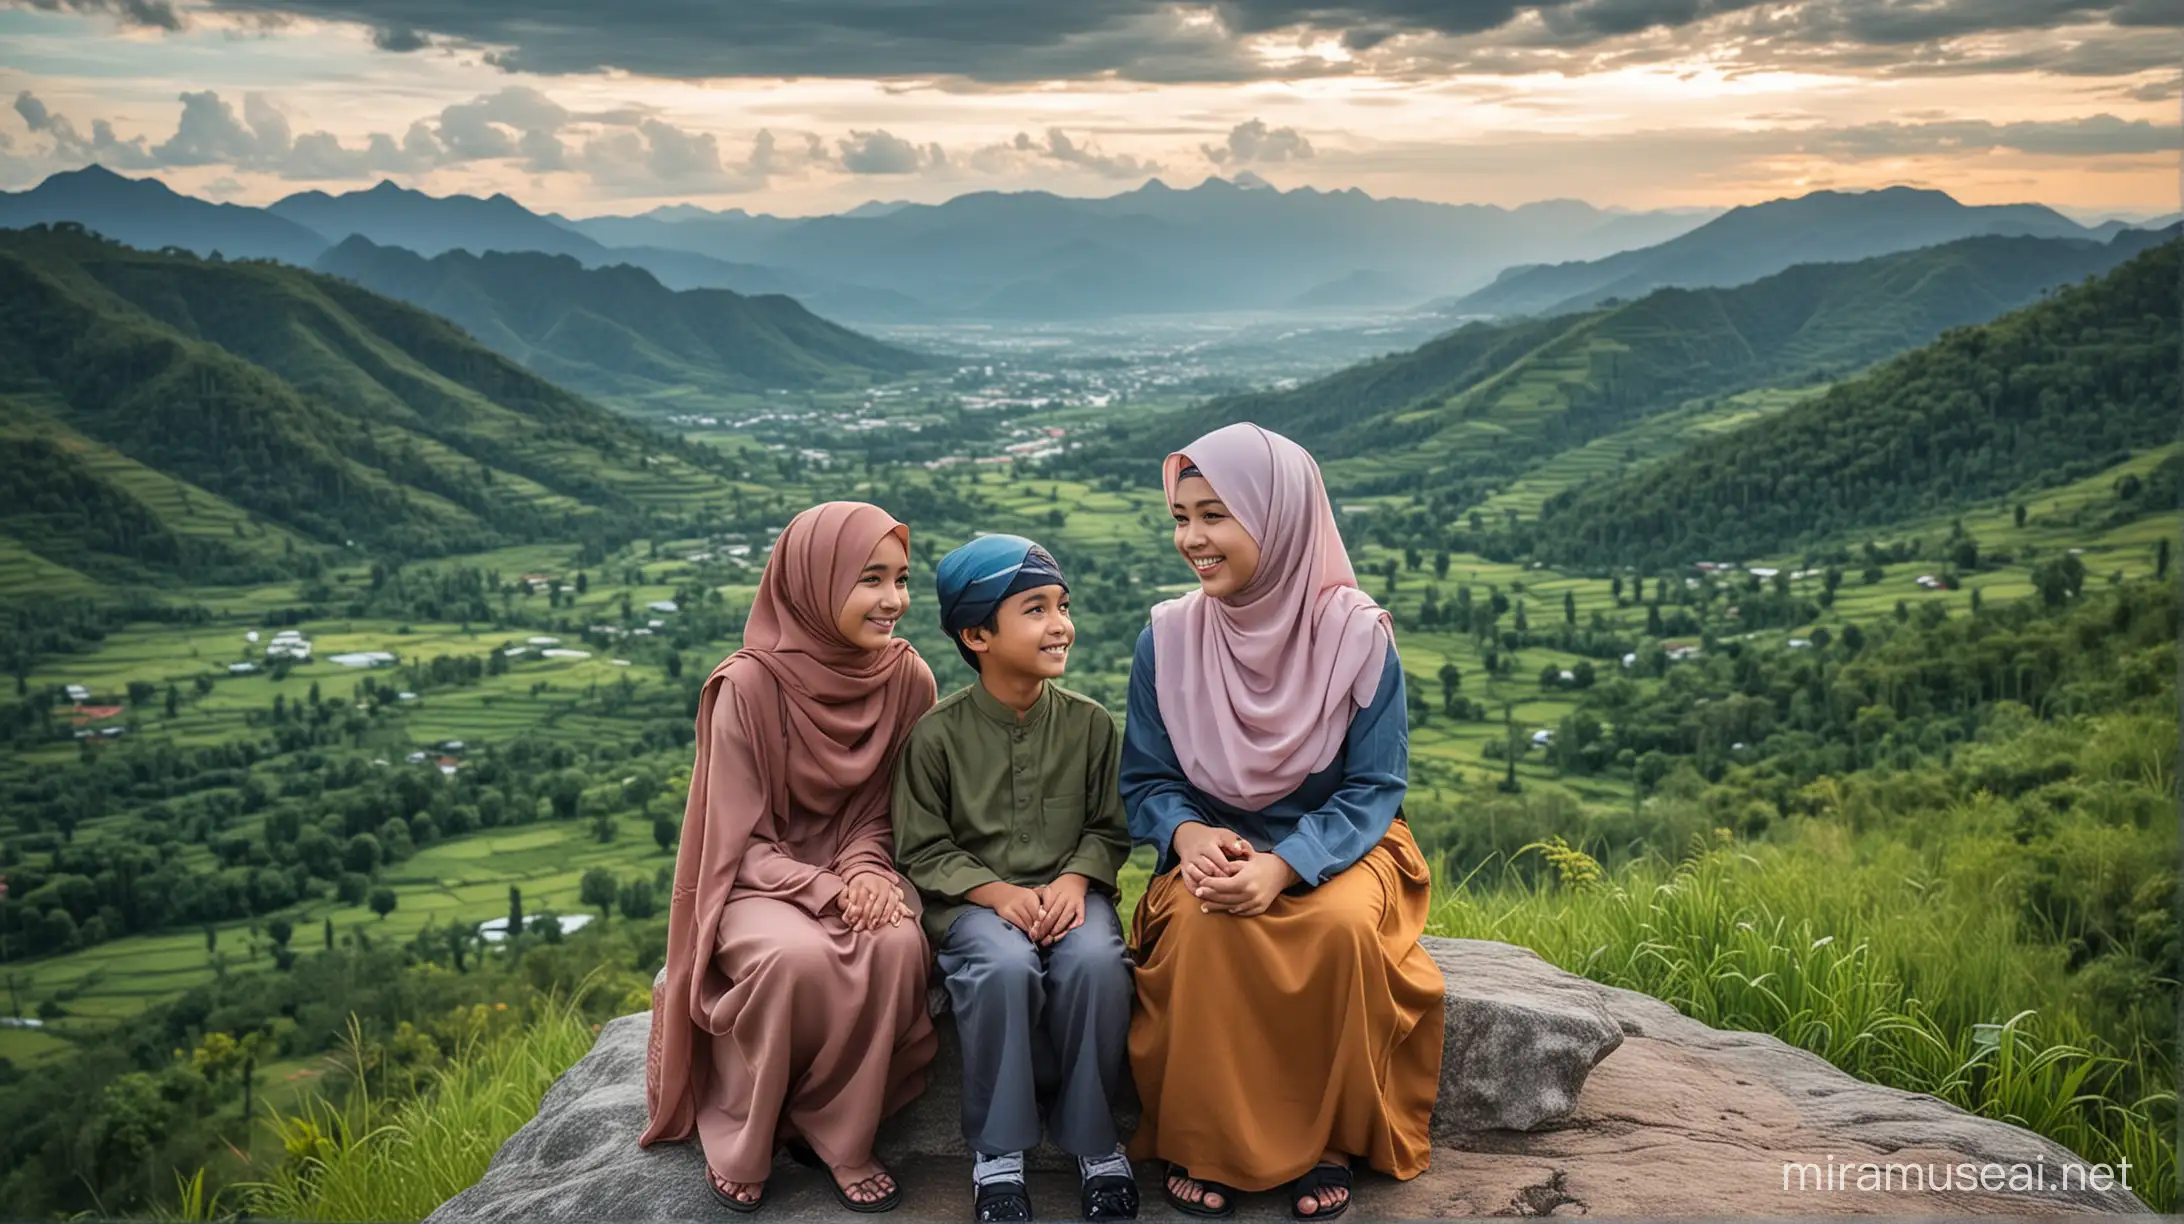 A beautiful malay Couple with hijab, 1boy, 1 girl, smiling face sitting side by side on a rock, overlooking a scenic view of mountains and green valleys. The sky should be clear with a few clouds, and the overall atmosphere should be serene and peaceful, vivid colour